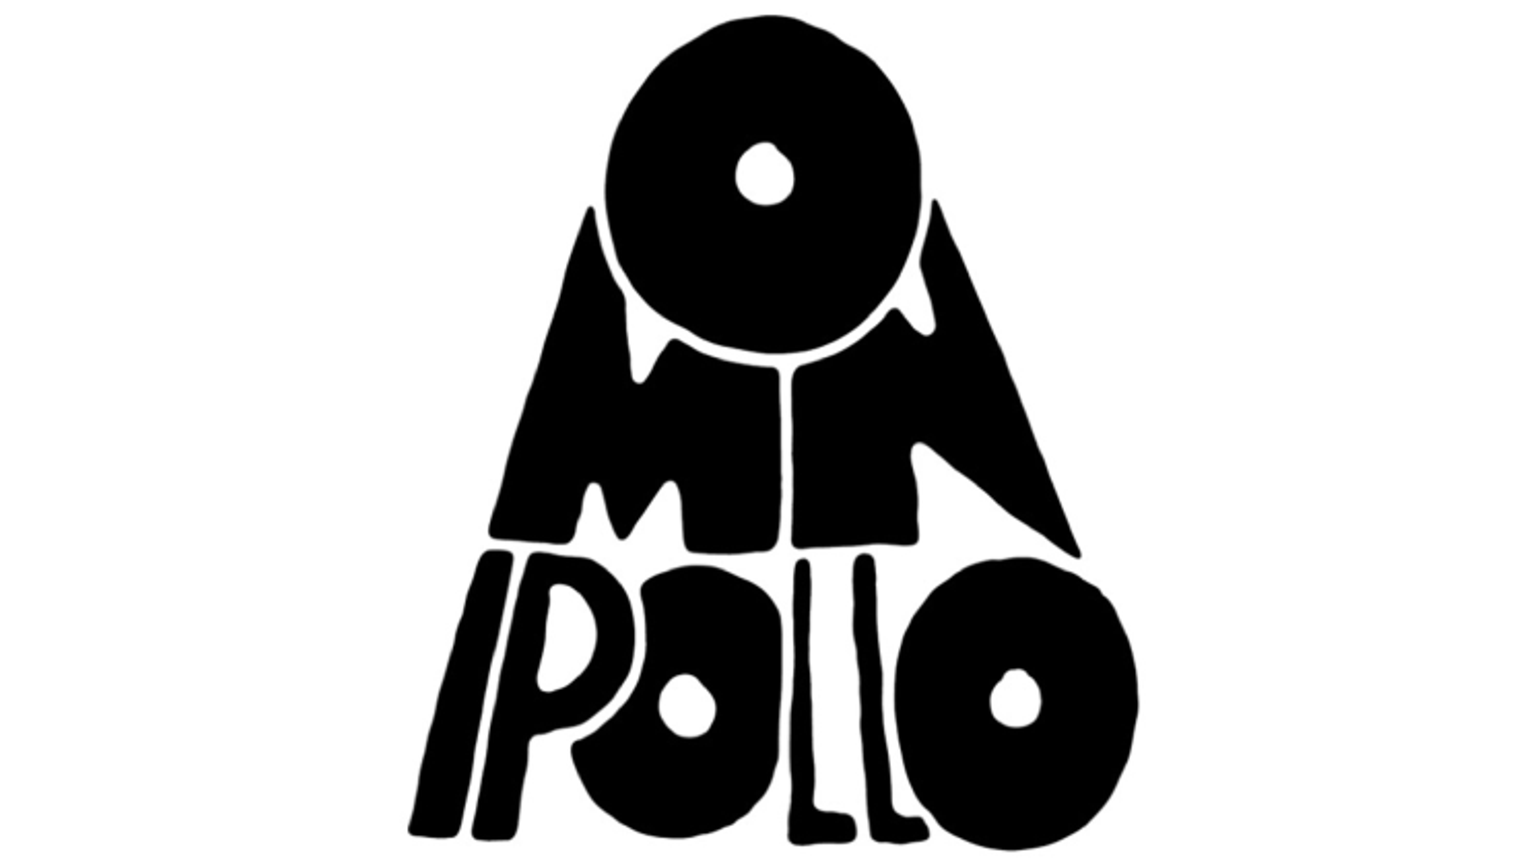 thumbnail for blog article named: Omnipollo: Craft Beer + Arte = Genio